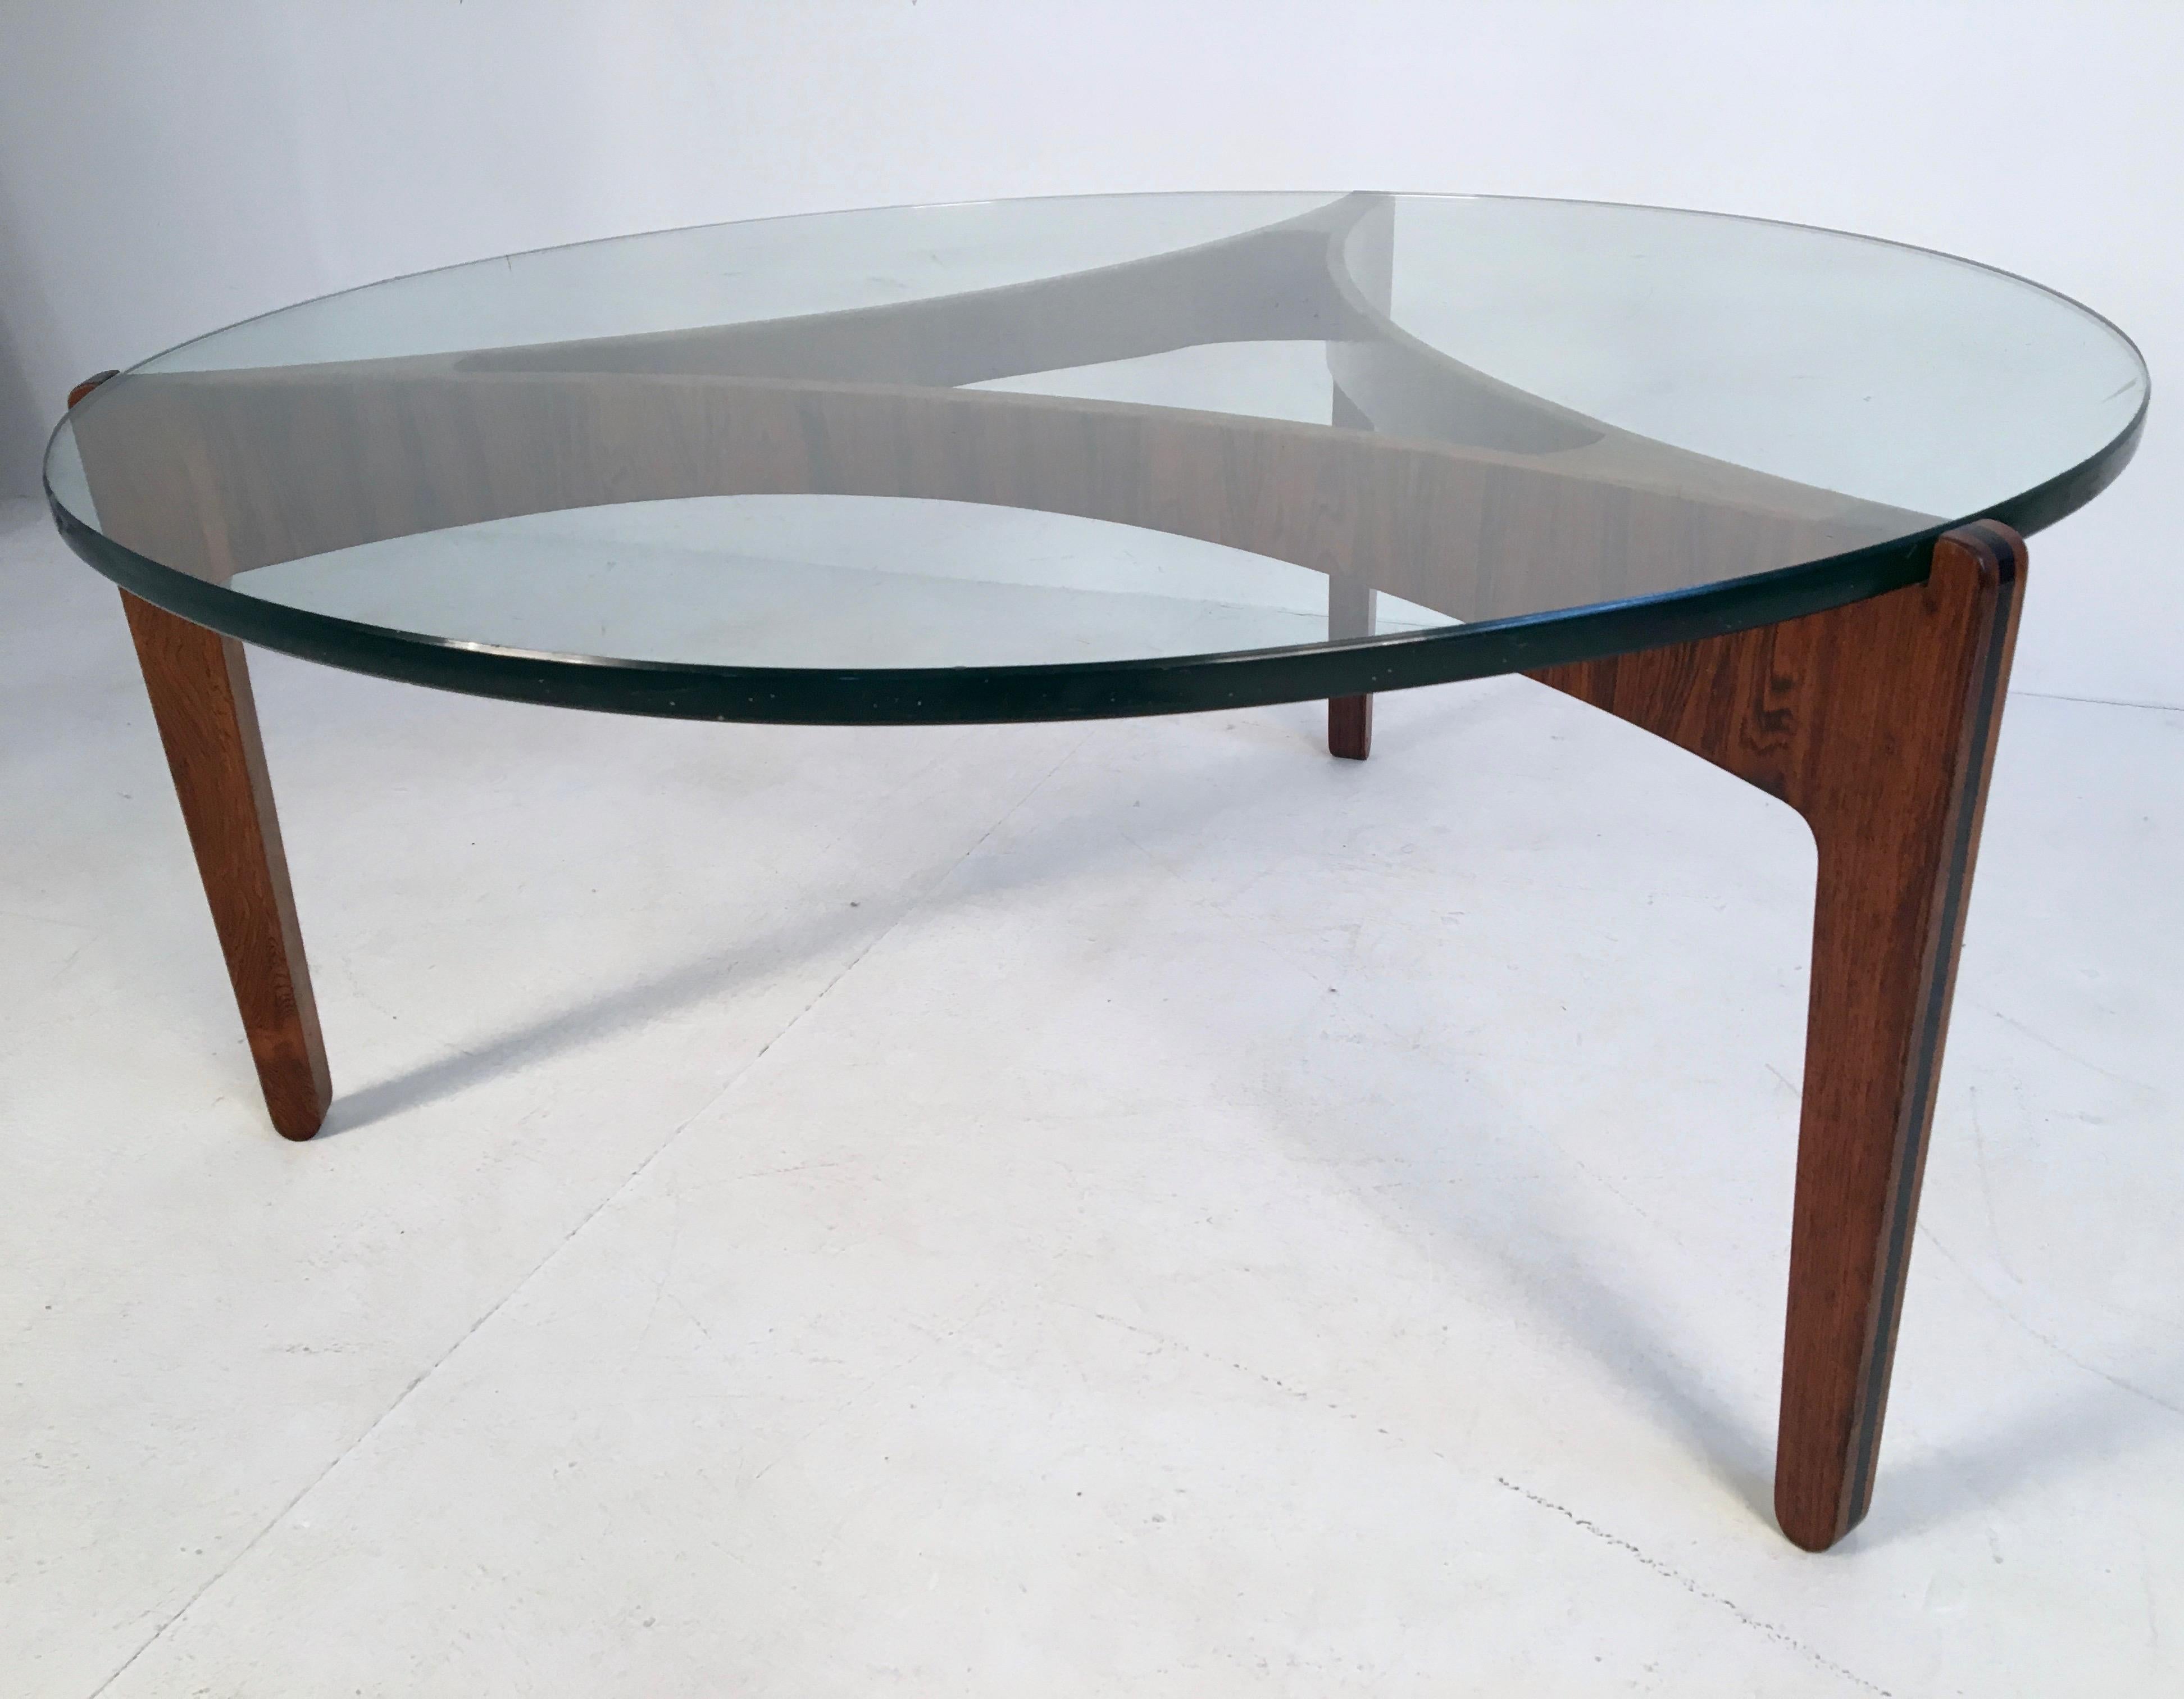 Midcentury Rosewood and Glass Coffee Table by S. Ellekaer, Denmark, circa 1960 1